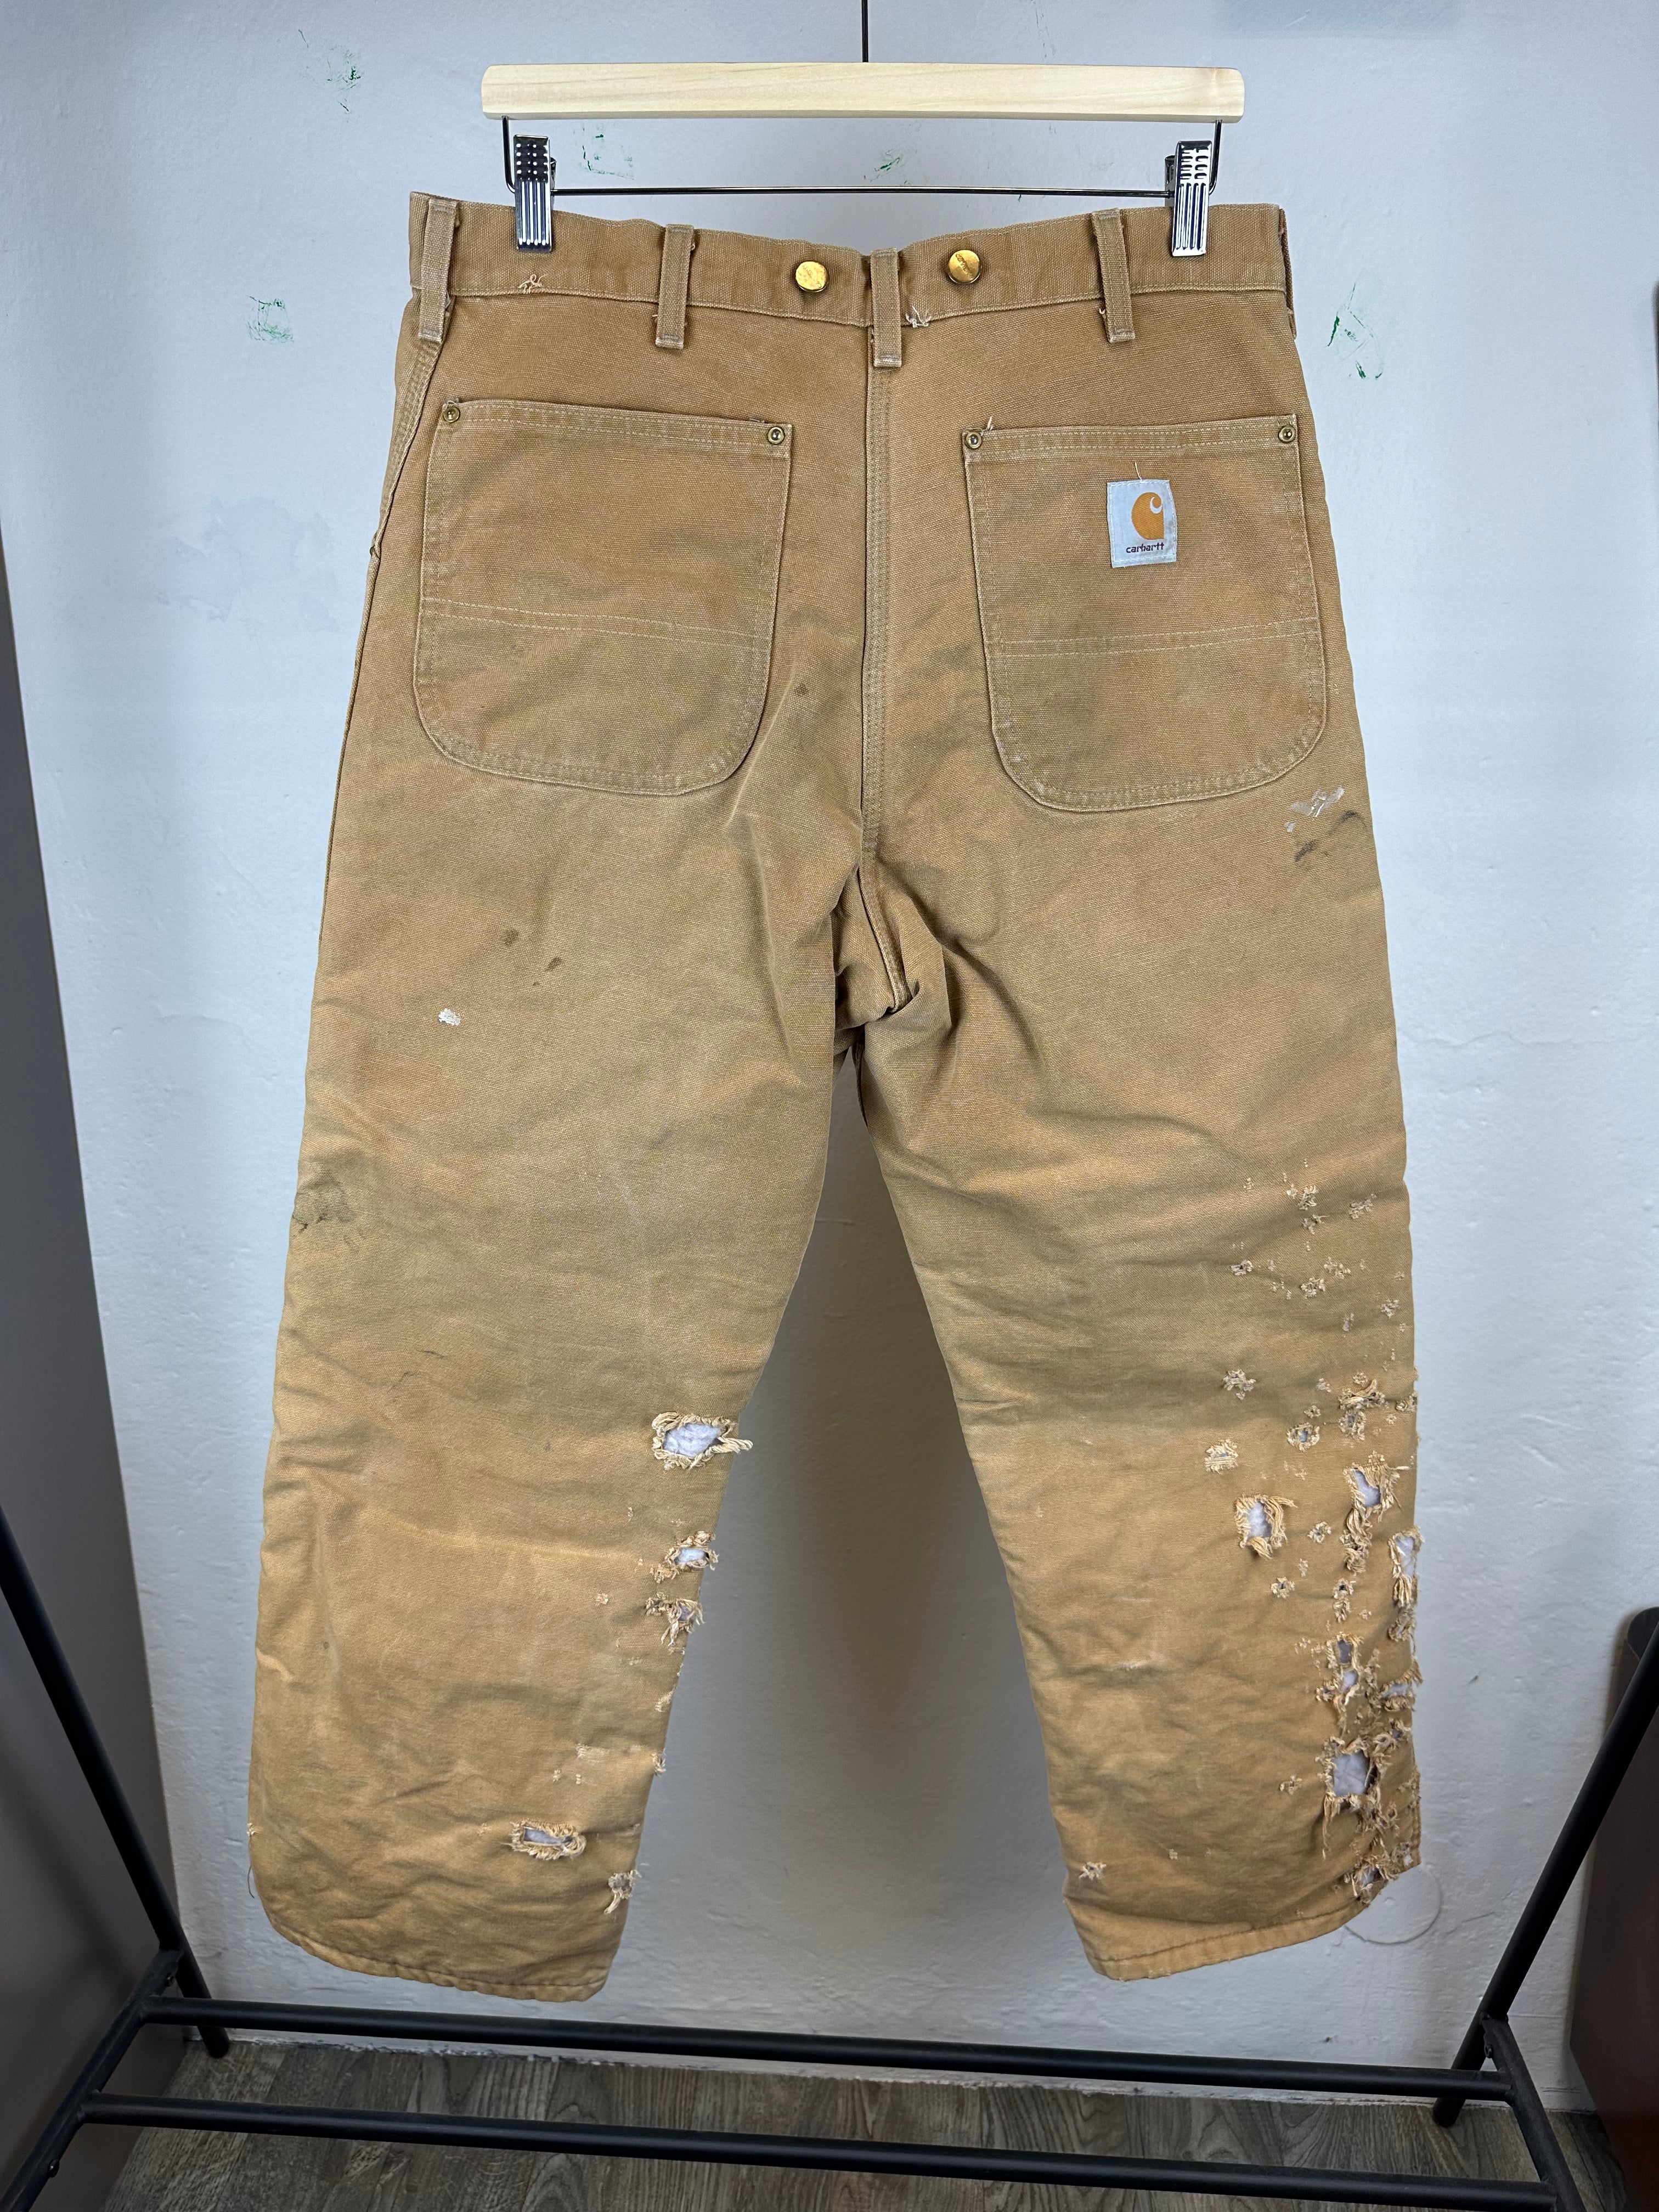 Vintage Carhartt Insulated Distressed 90s Pants - size 34x30